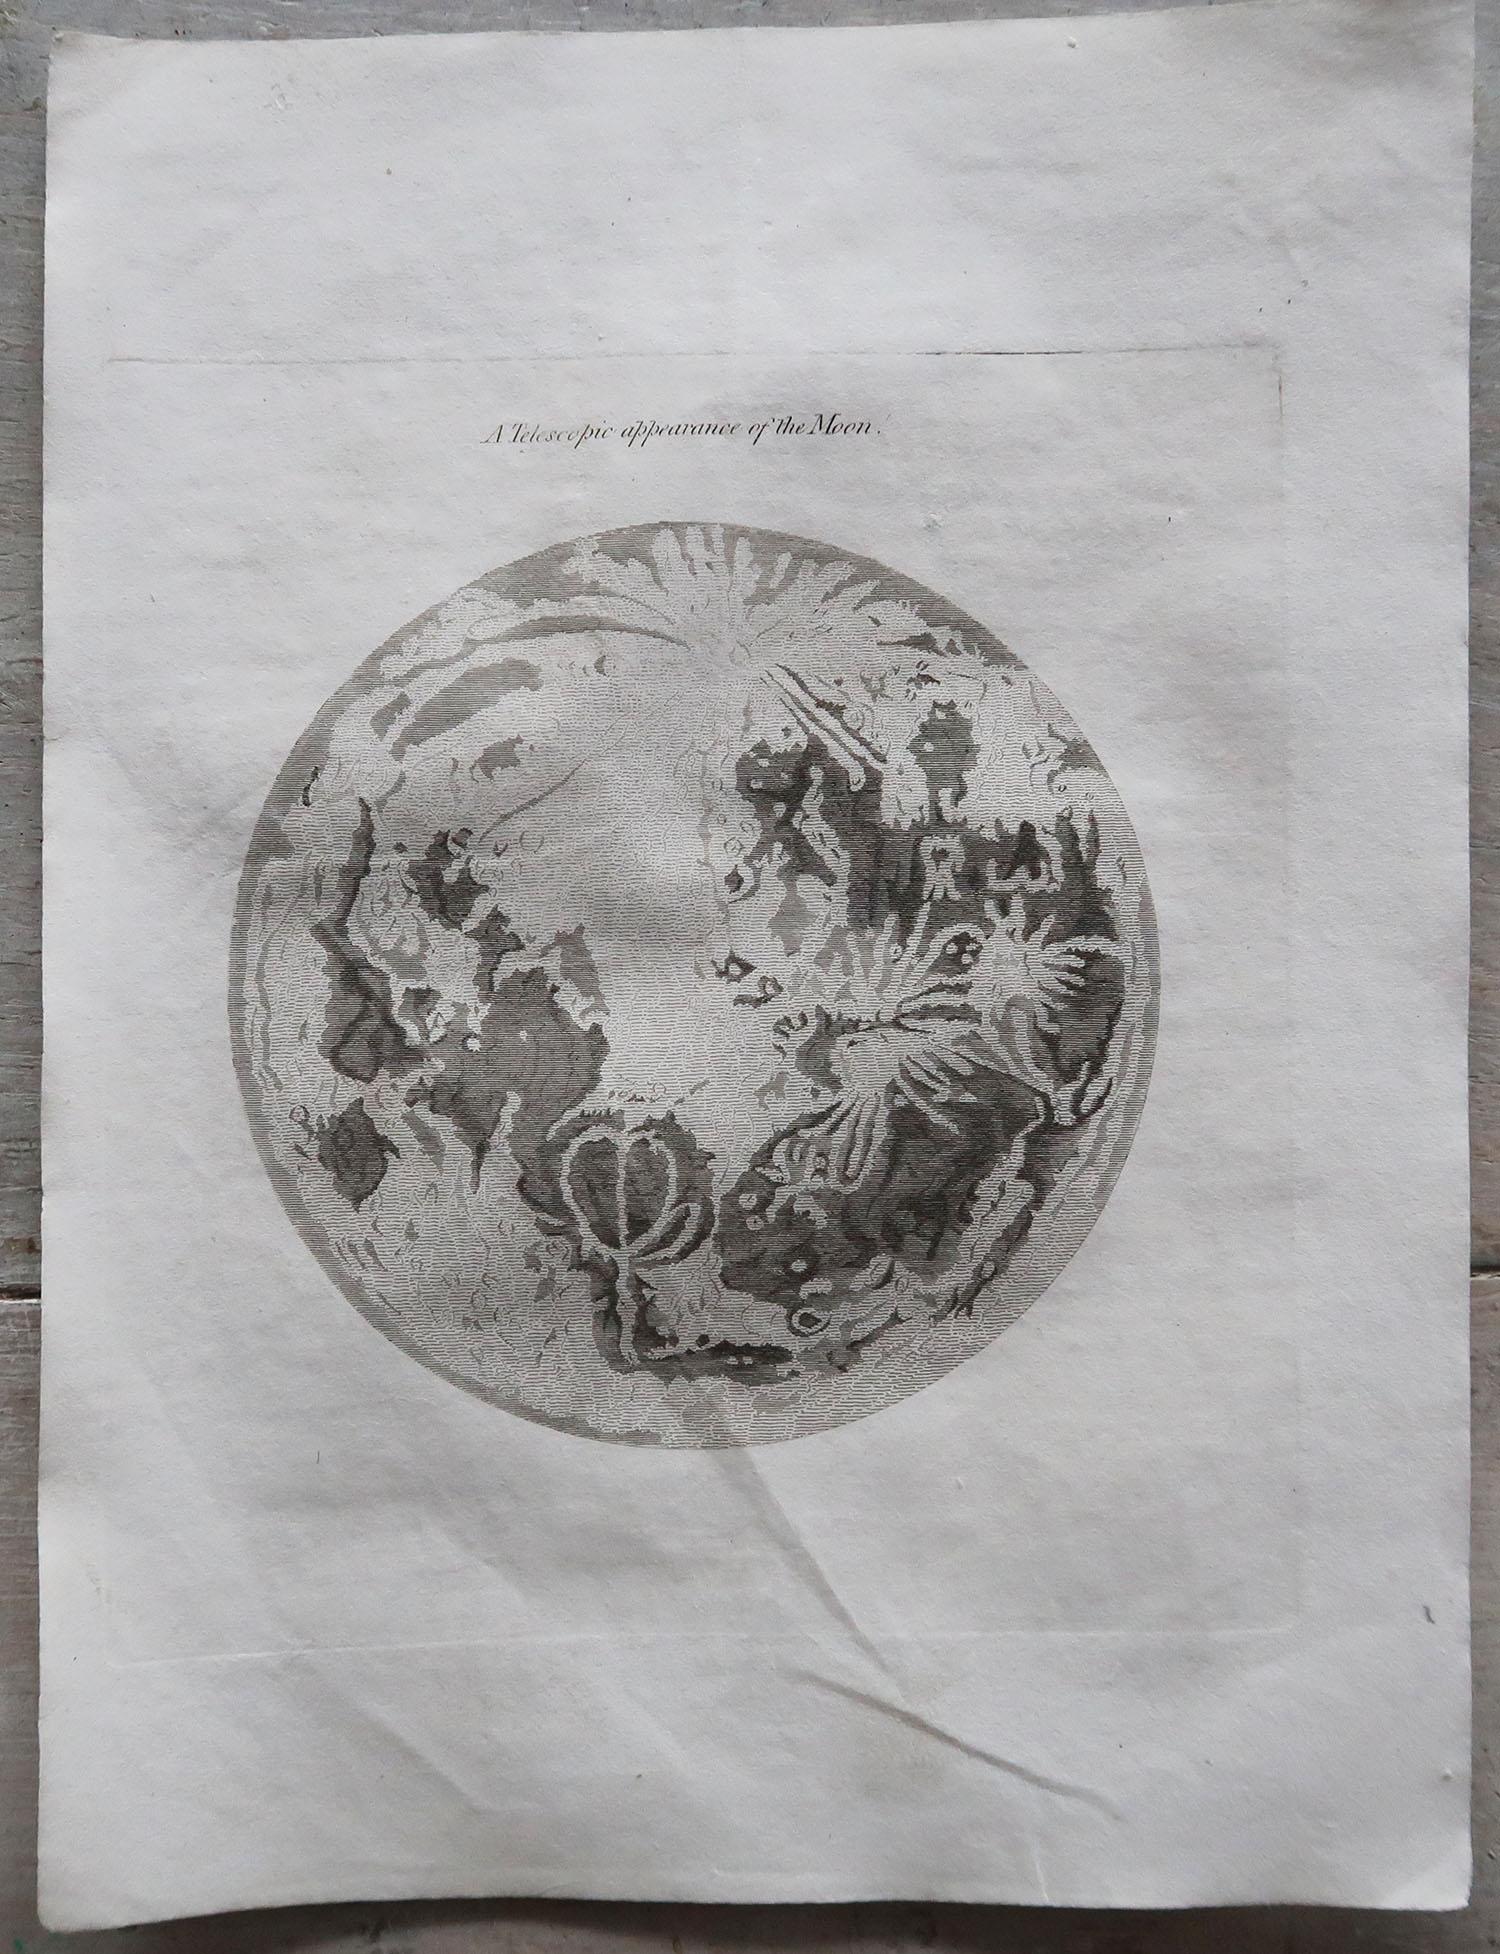 Other Original Antique Map of the Moon, Dated 1812